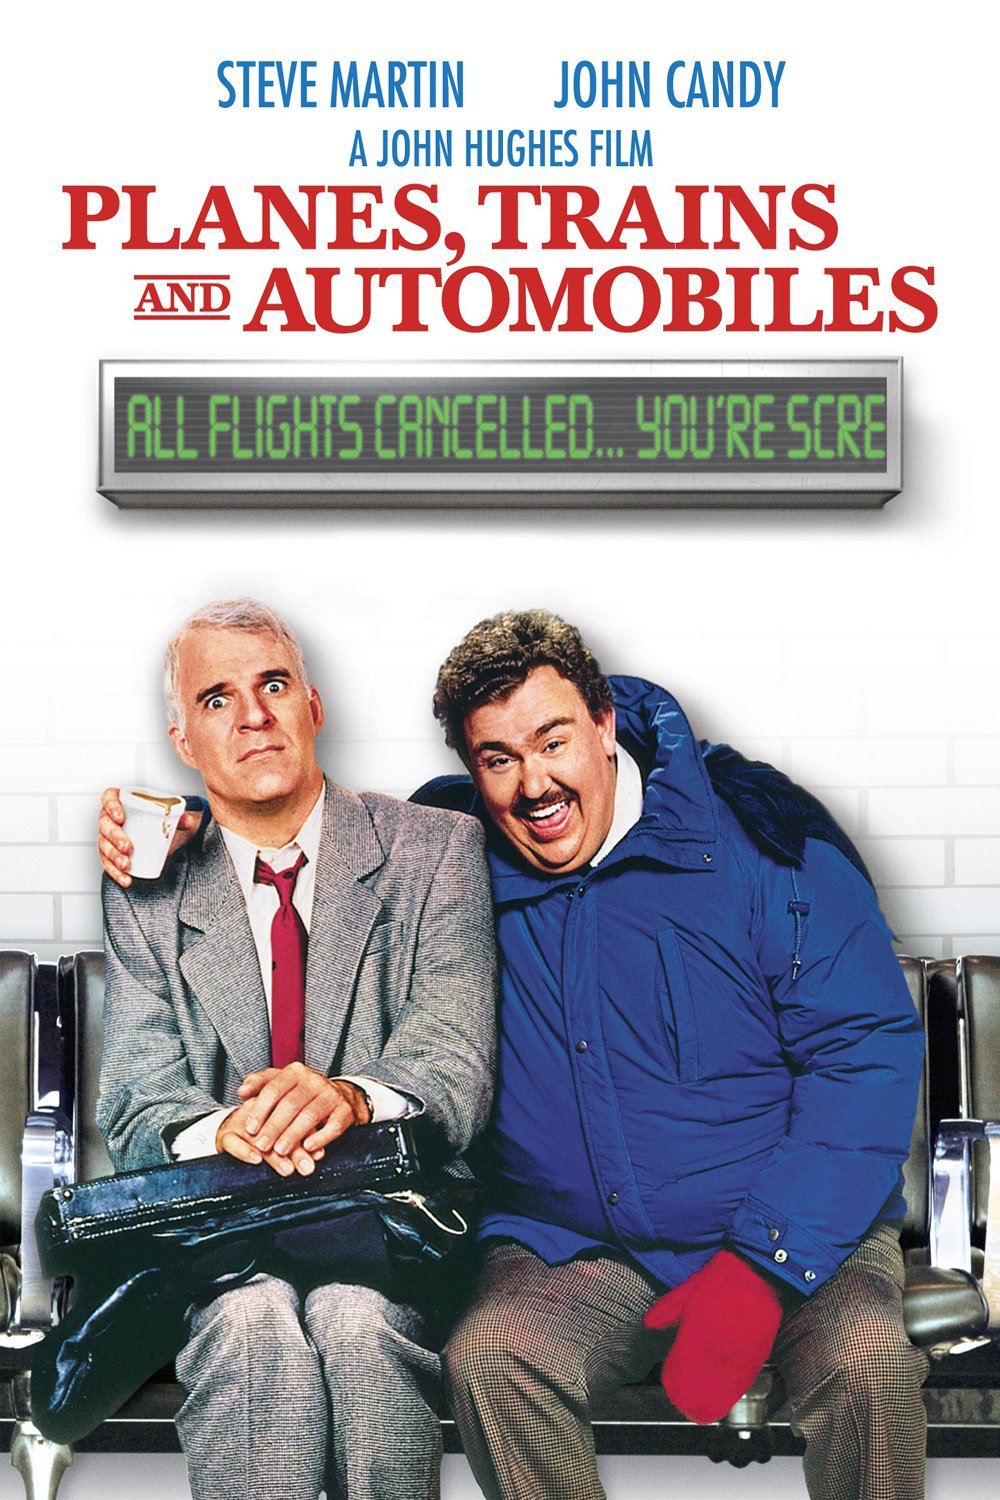 Poster of the movie Planes, Trains & Automobiles